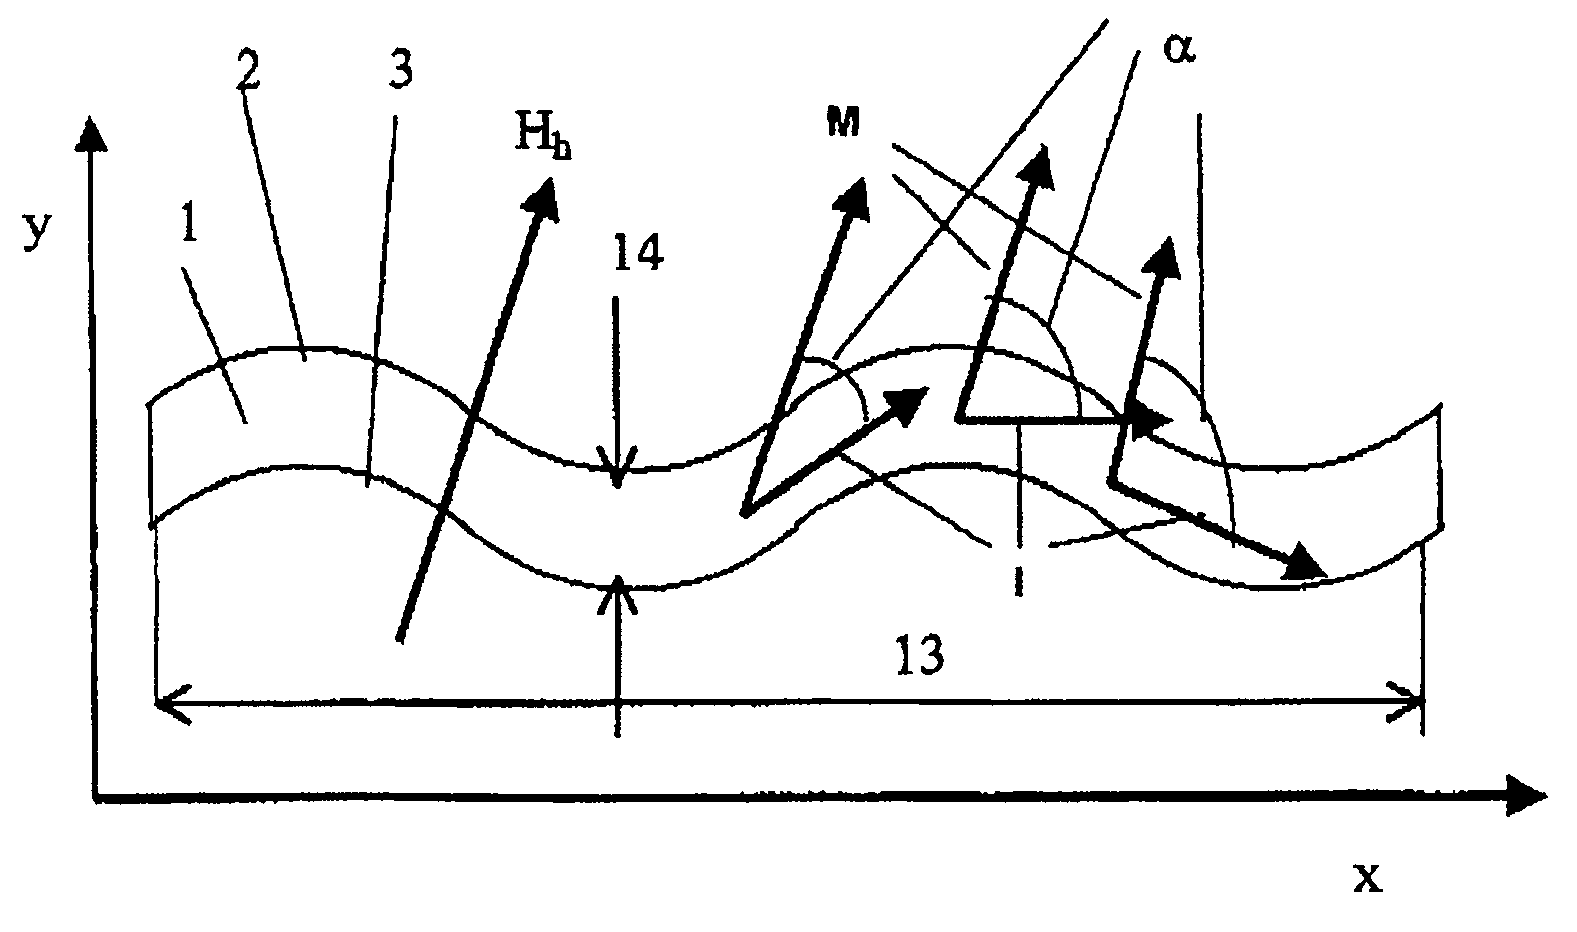 Magnetoresistive sensor for determining an angle or a position